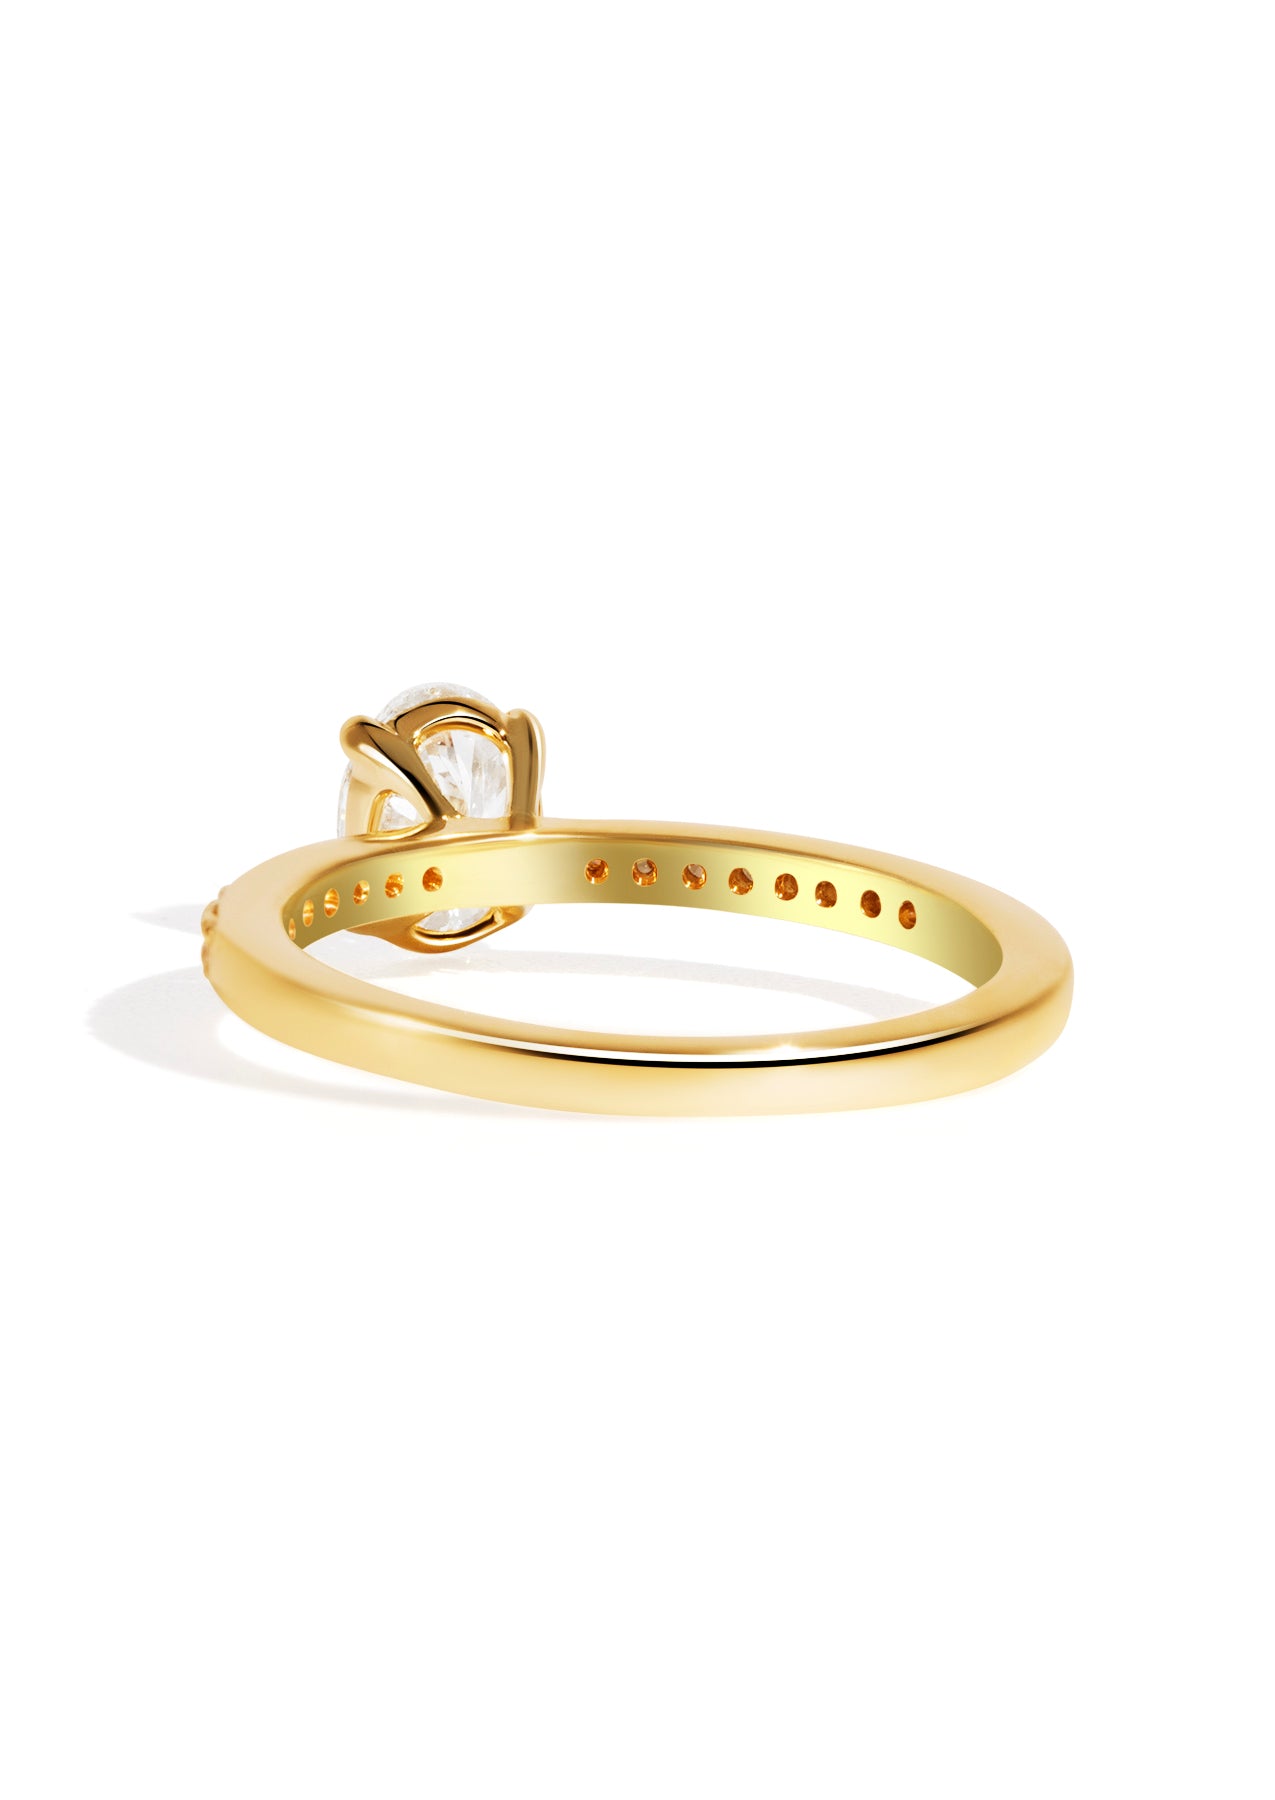 The Juliette Ring with 1.02ct Cultured Diamond